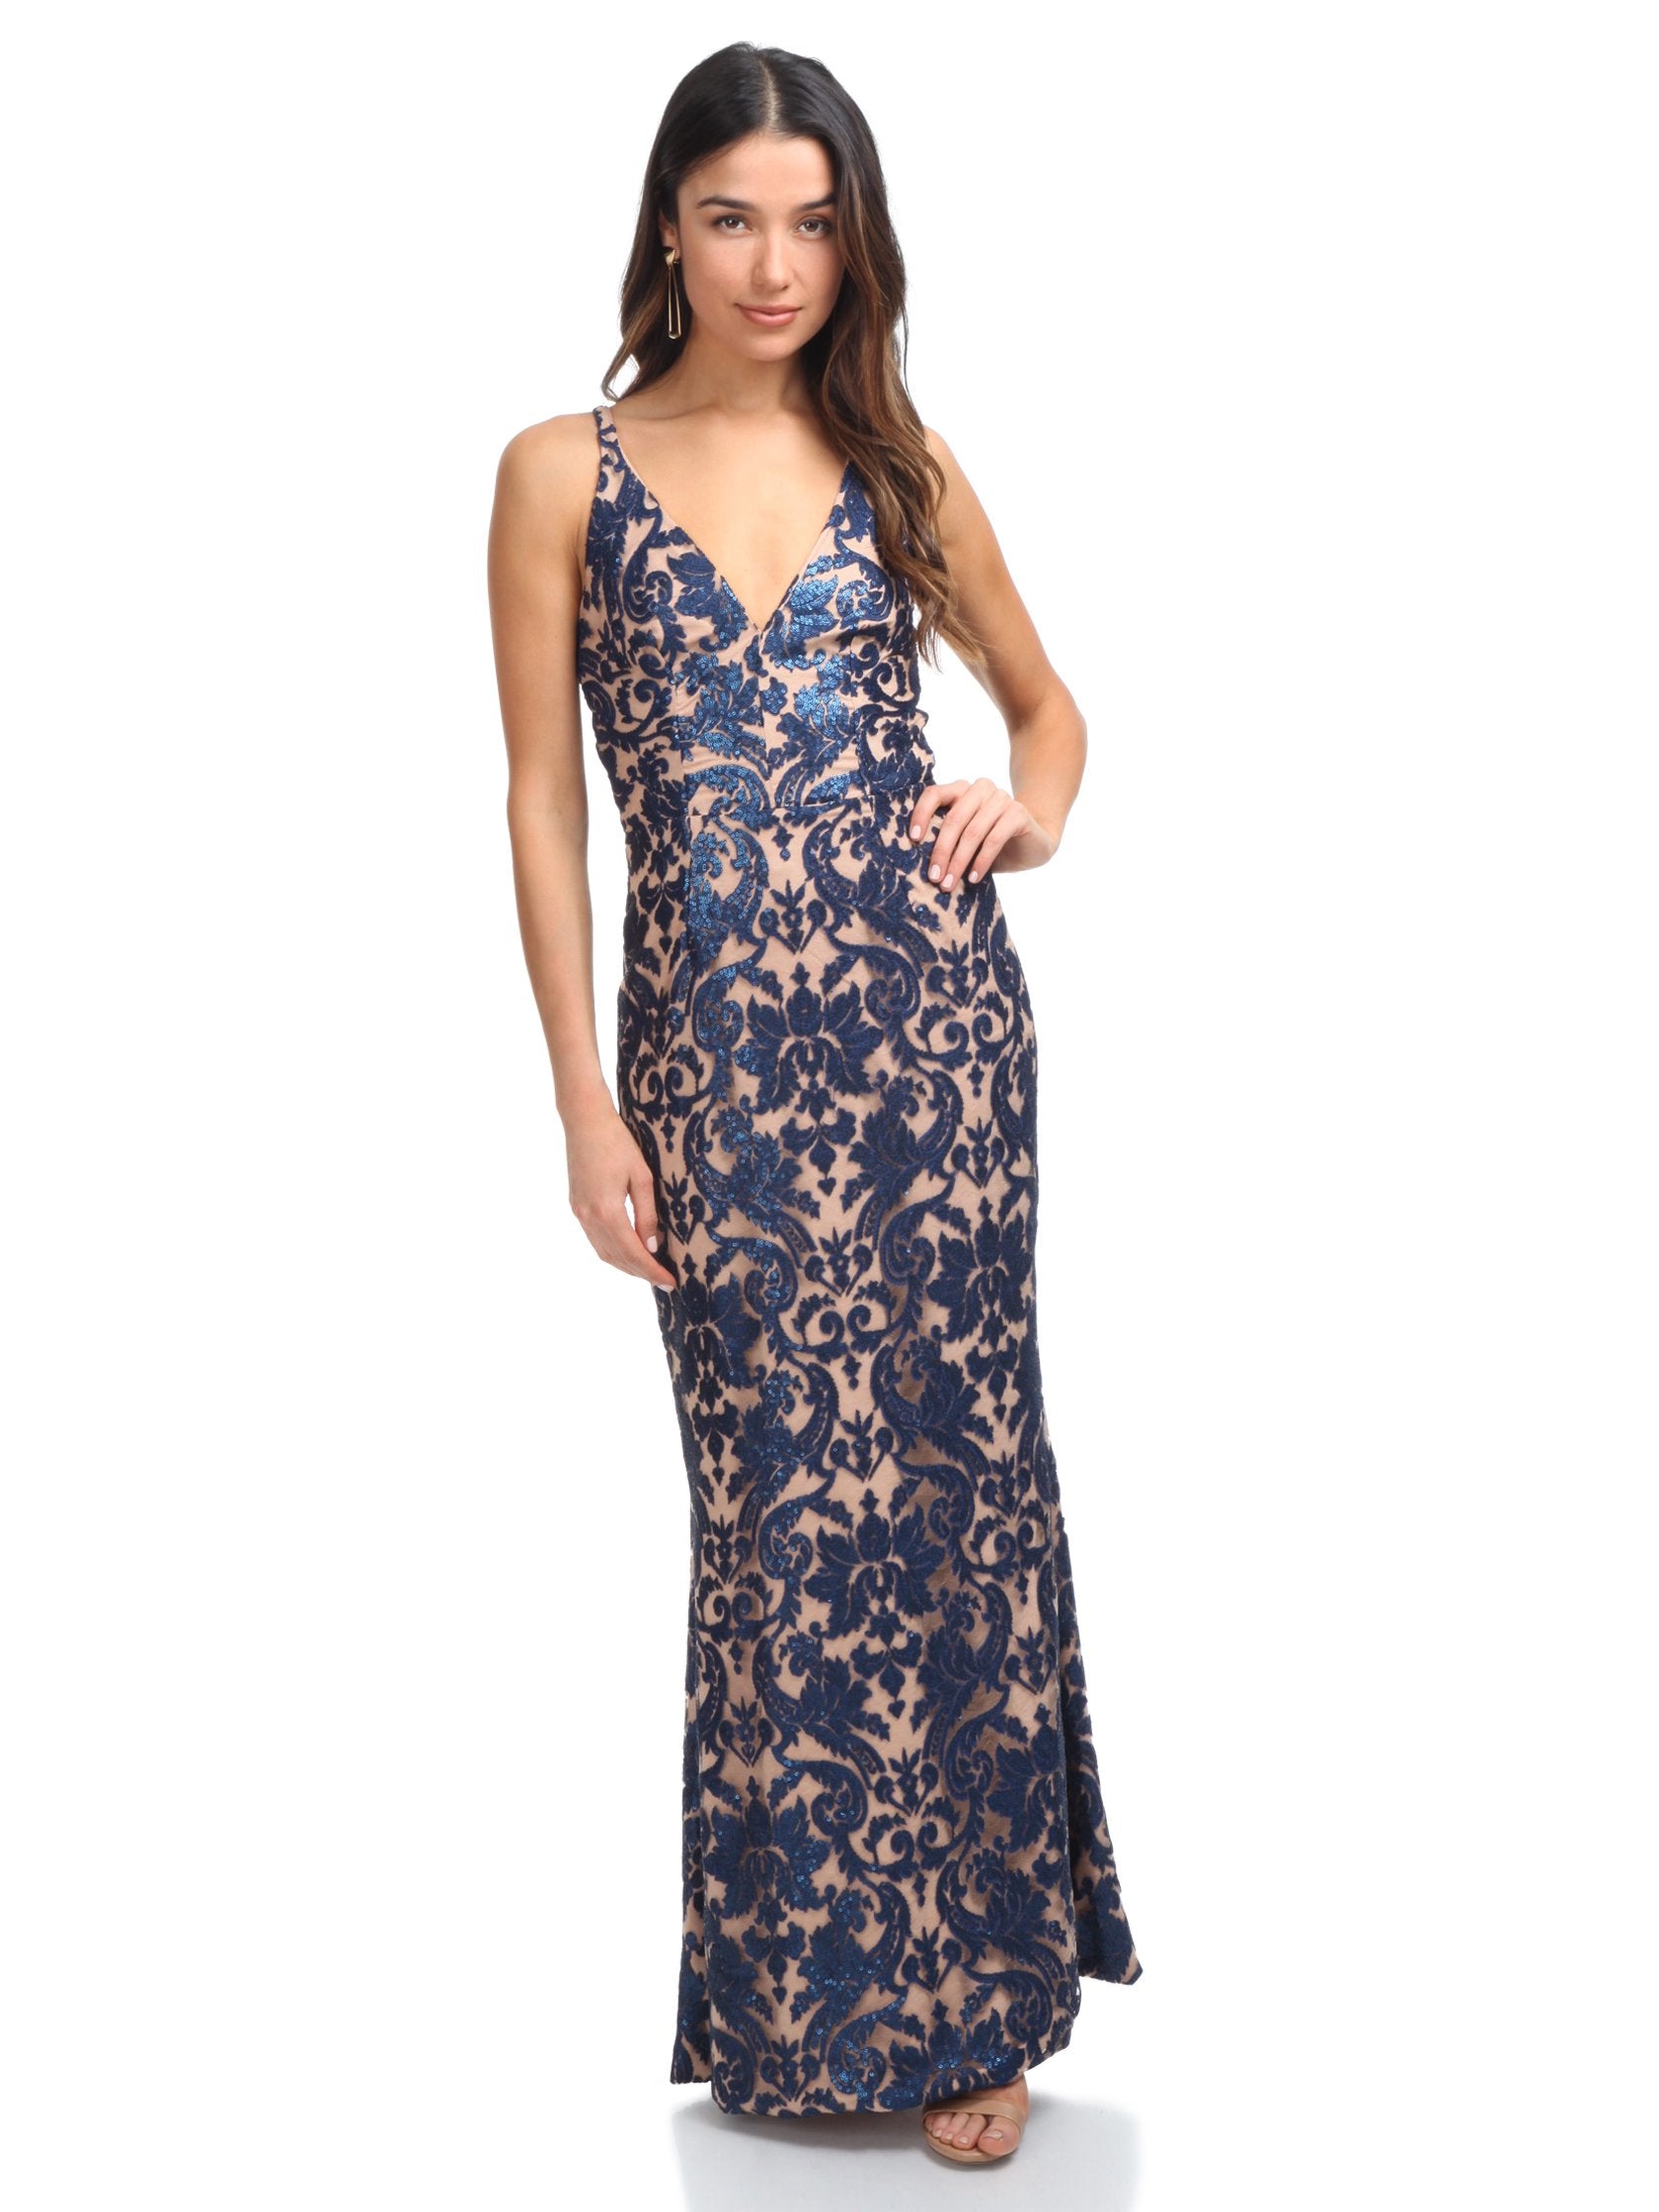 Girl outfit in a dress rental from Dress the Population called Karen Sequin Lace Gown